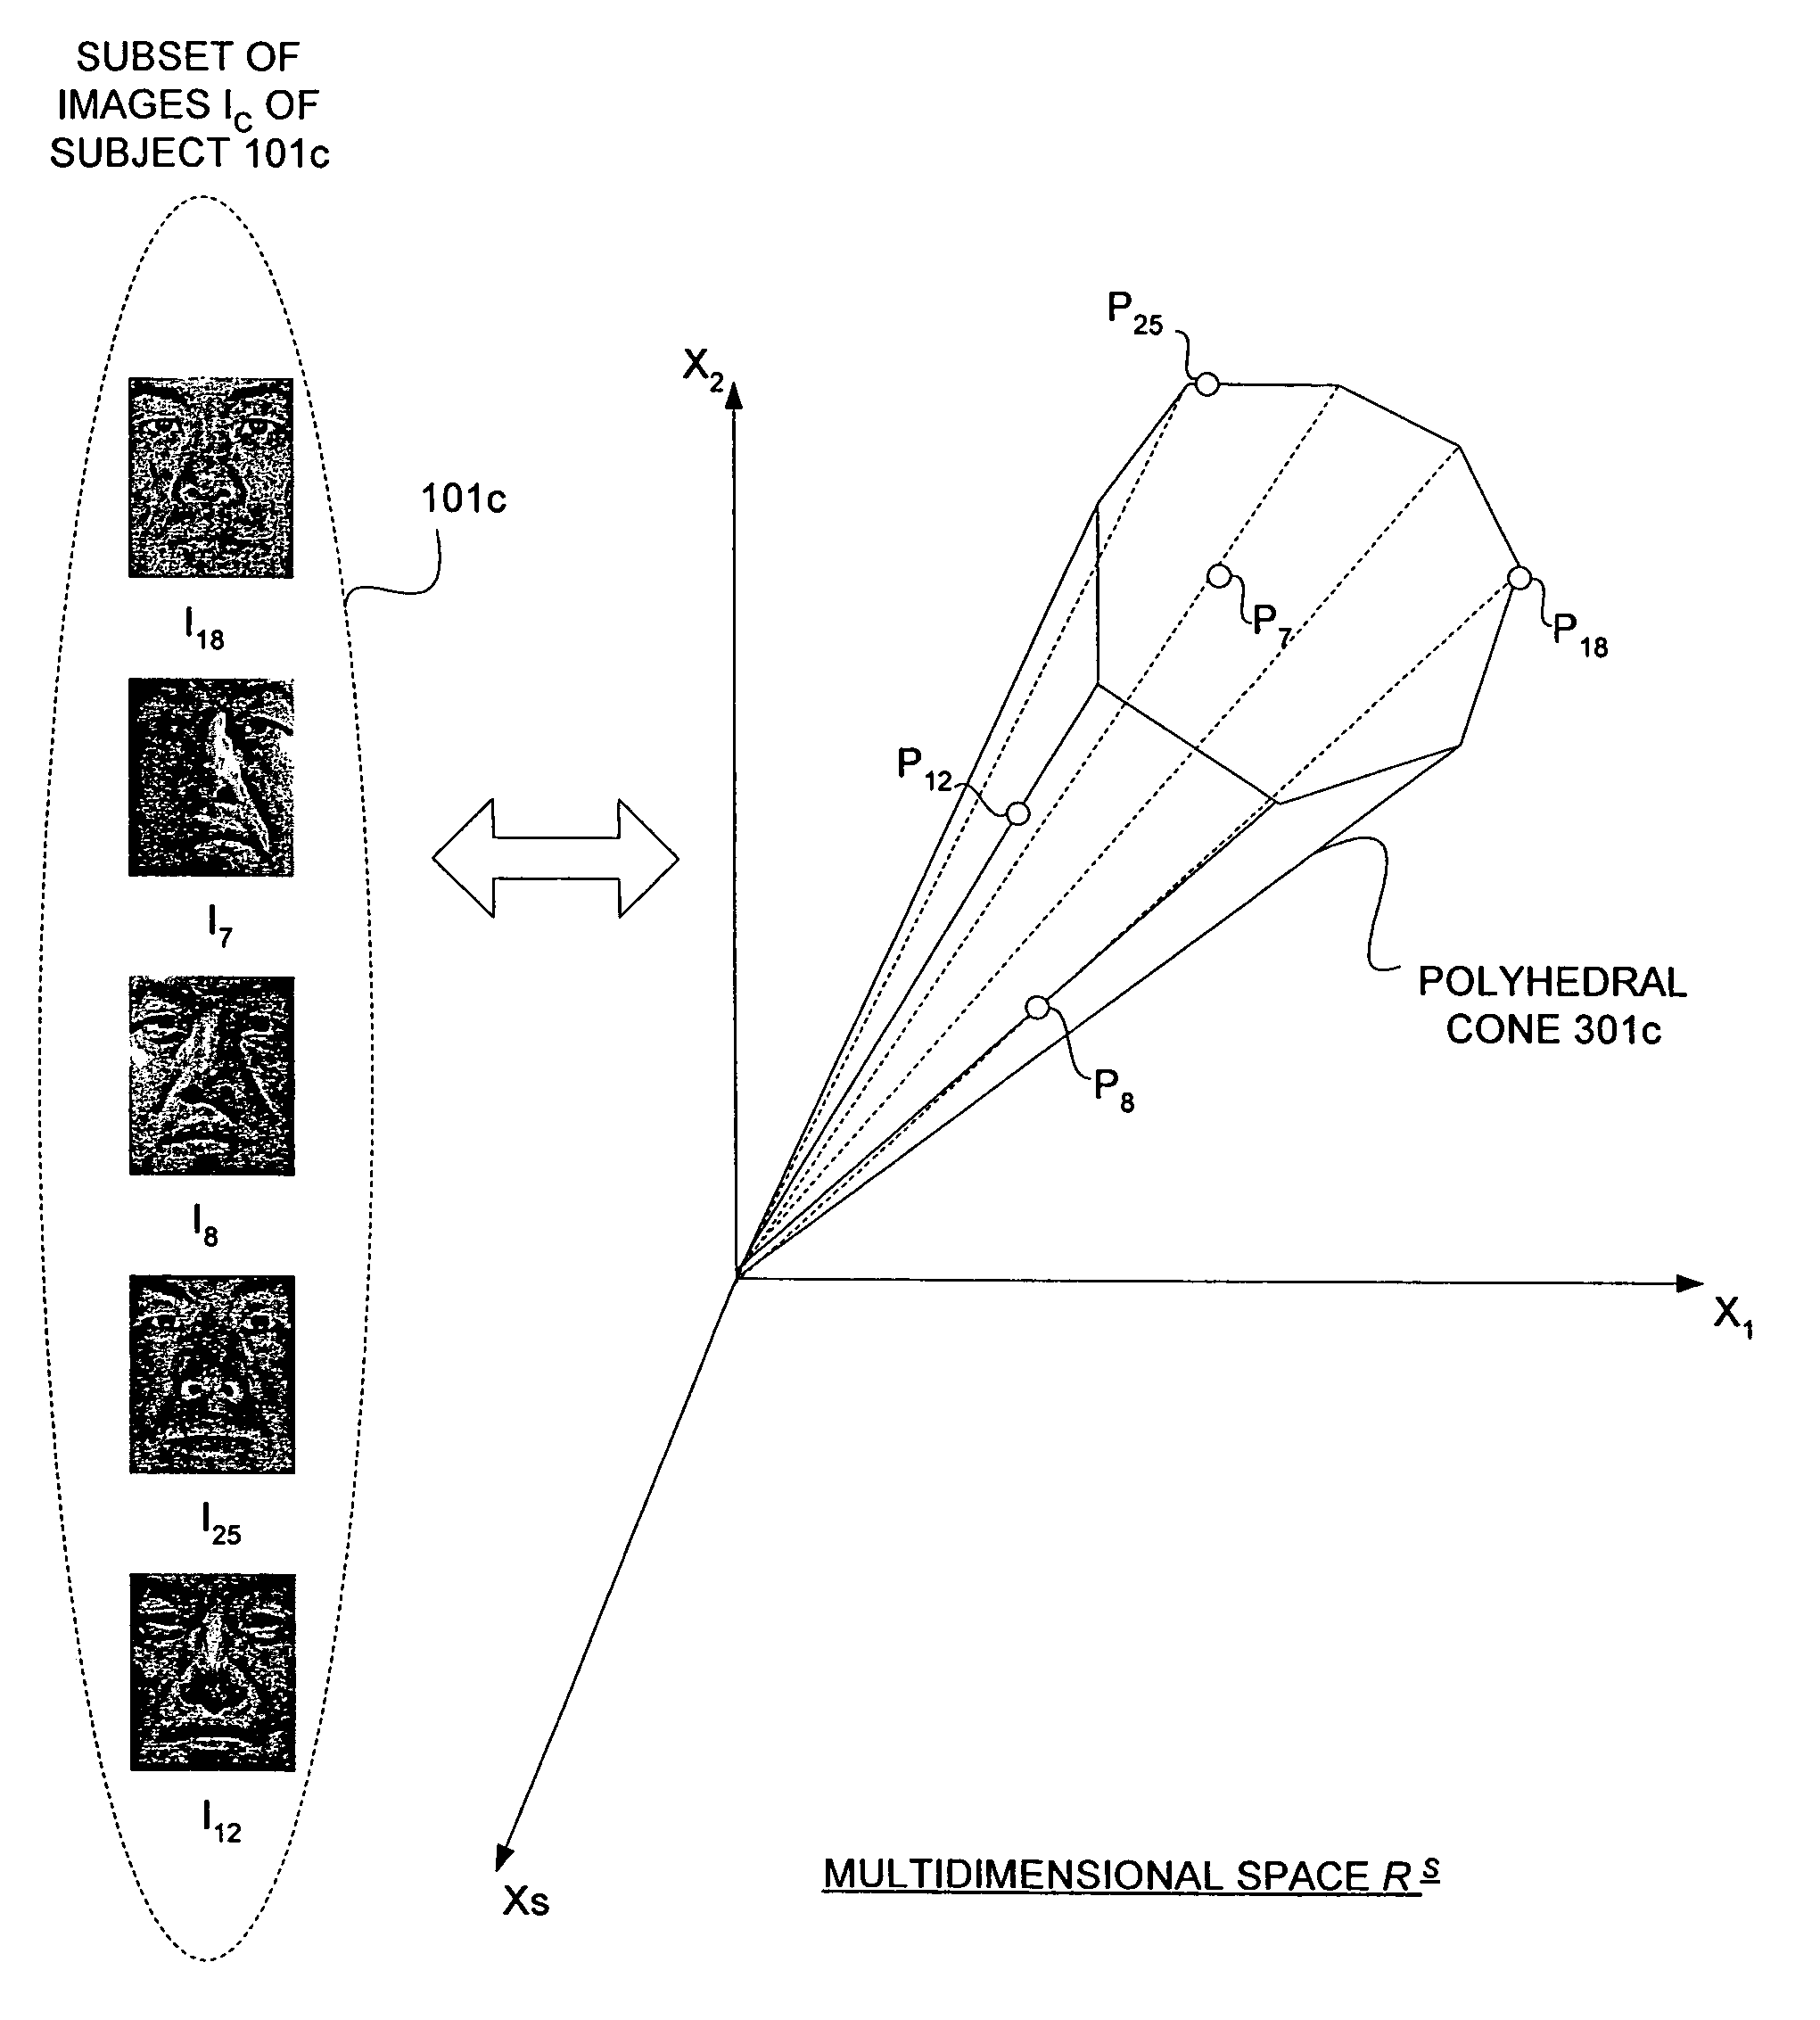 Clustering appearances of objects under varying illumination conditions